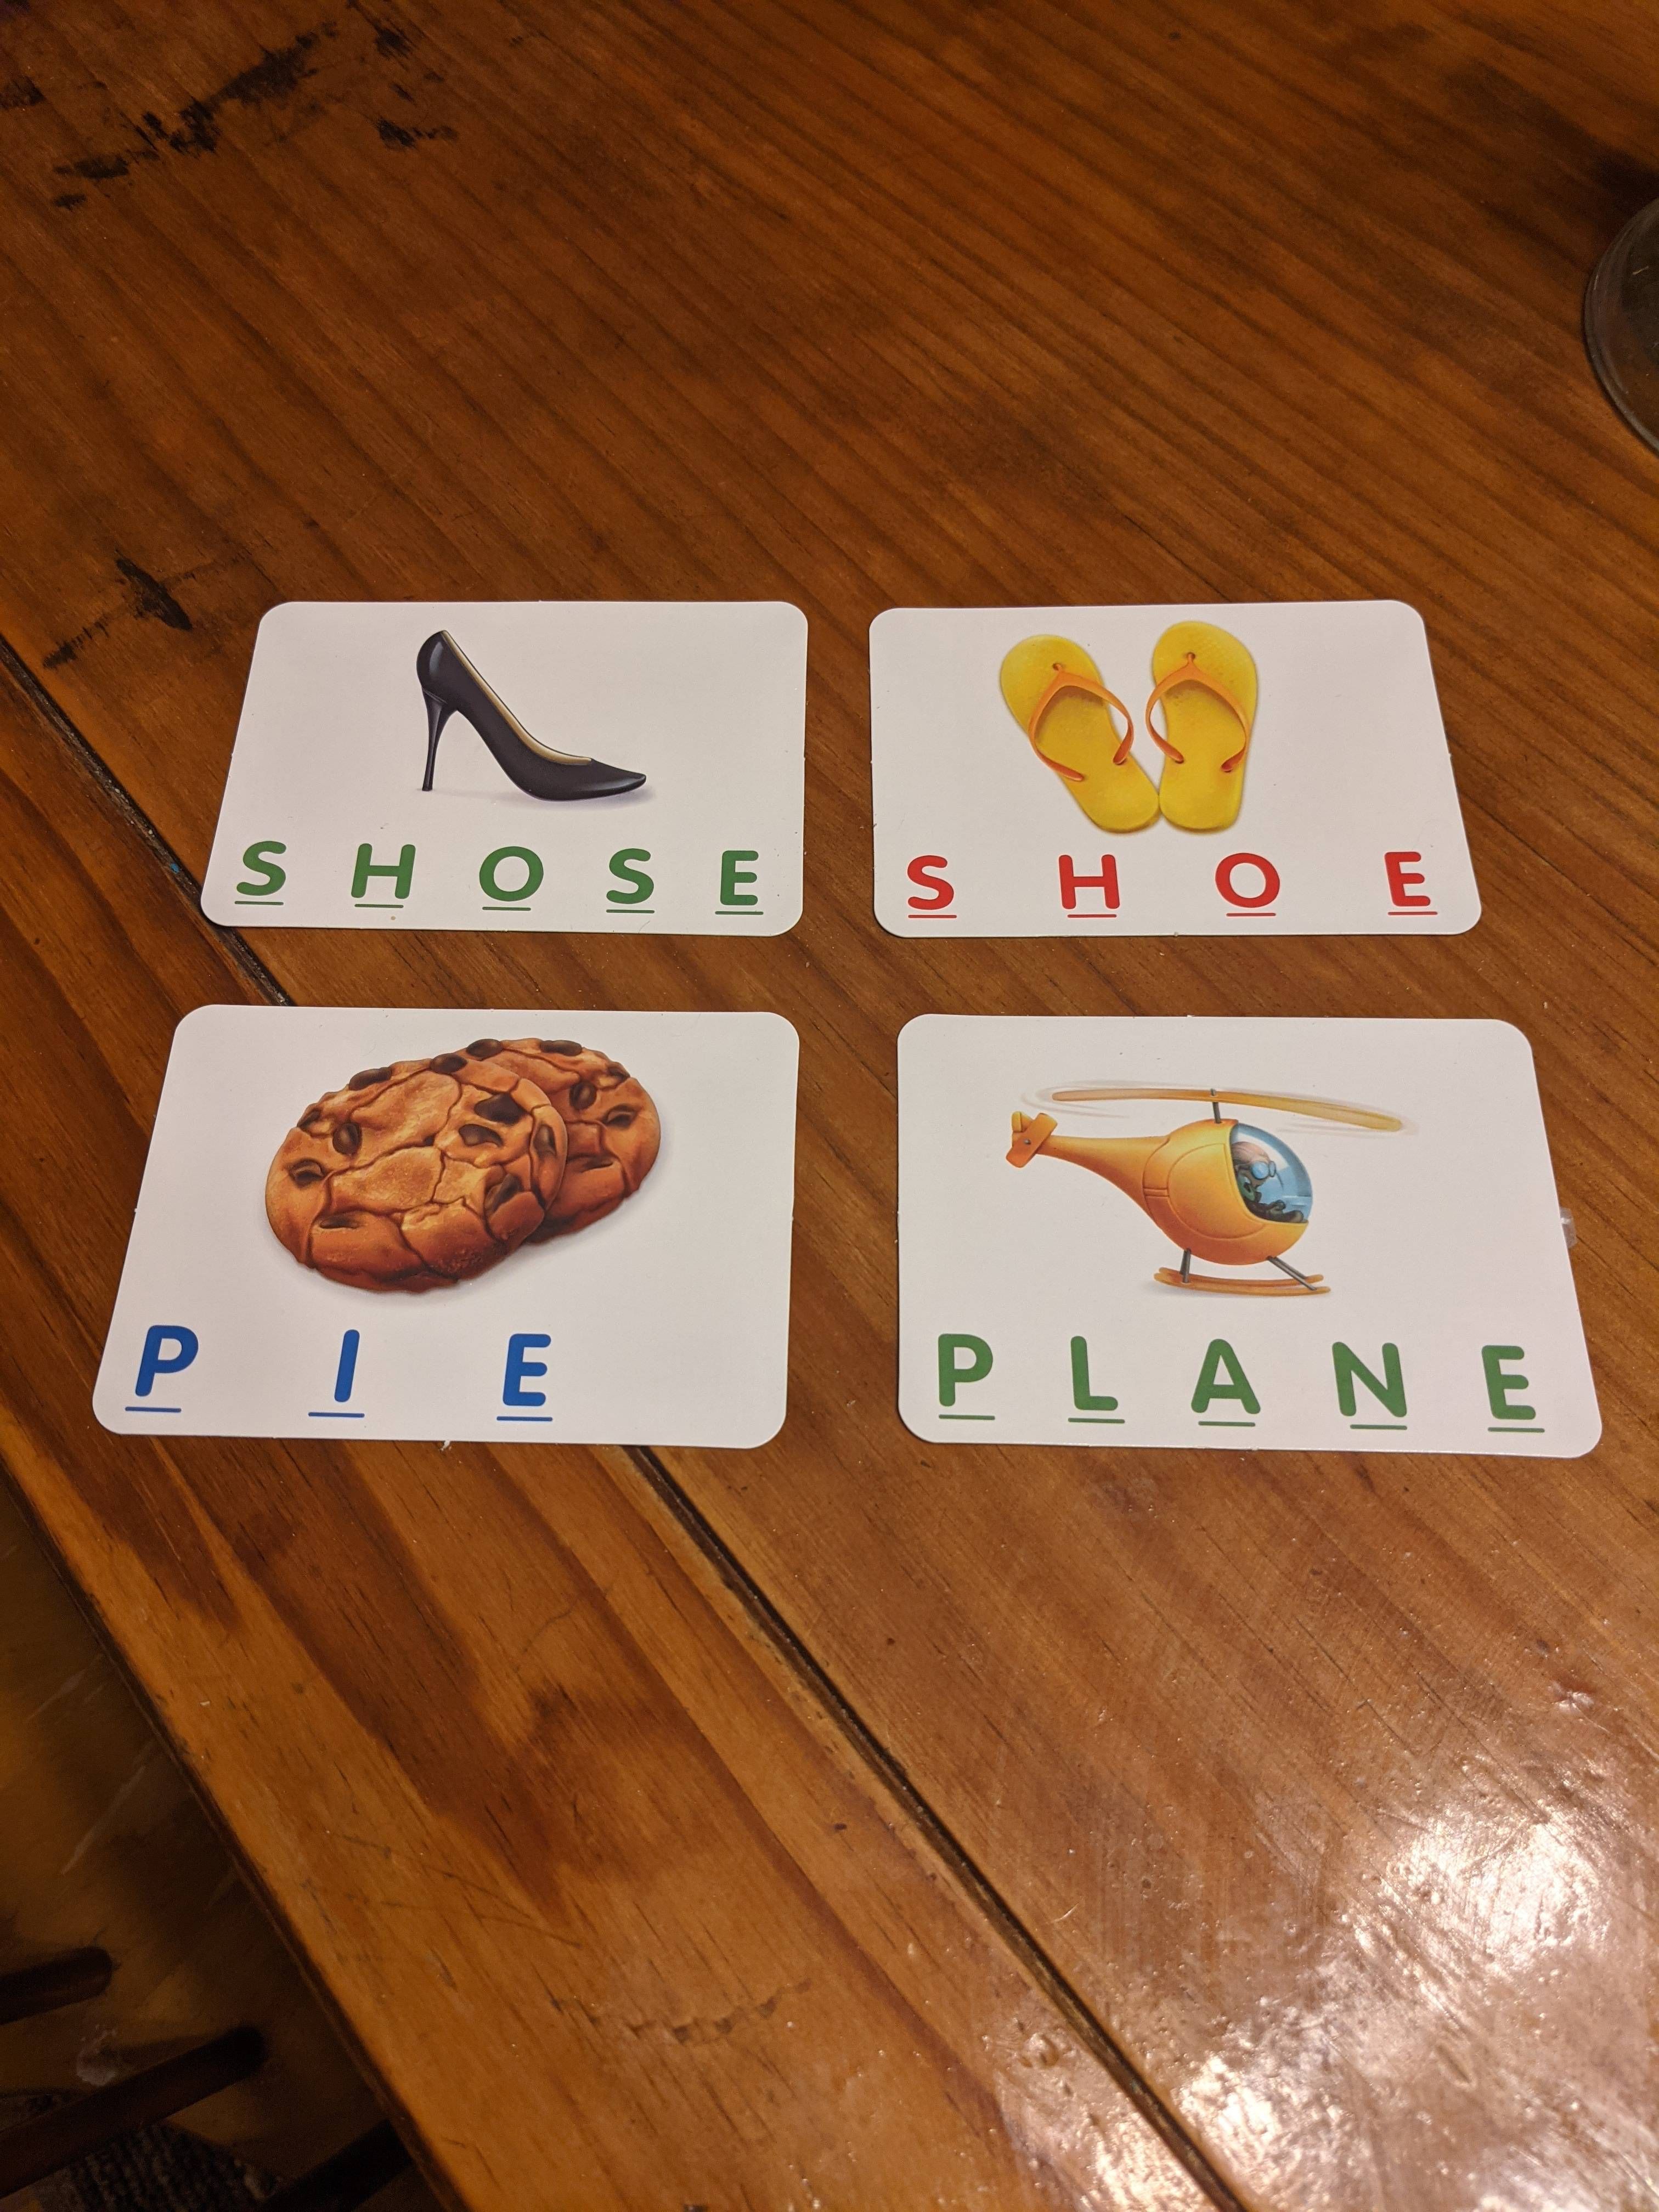 My son's educational spelling game had some issues...